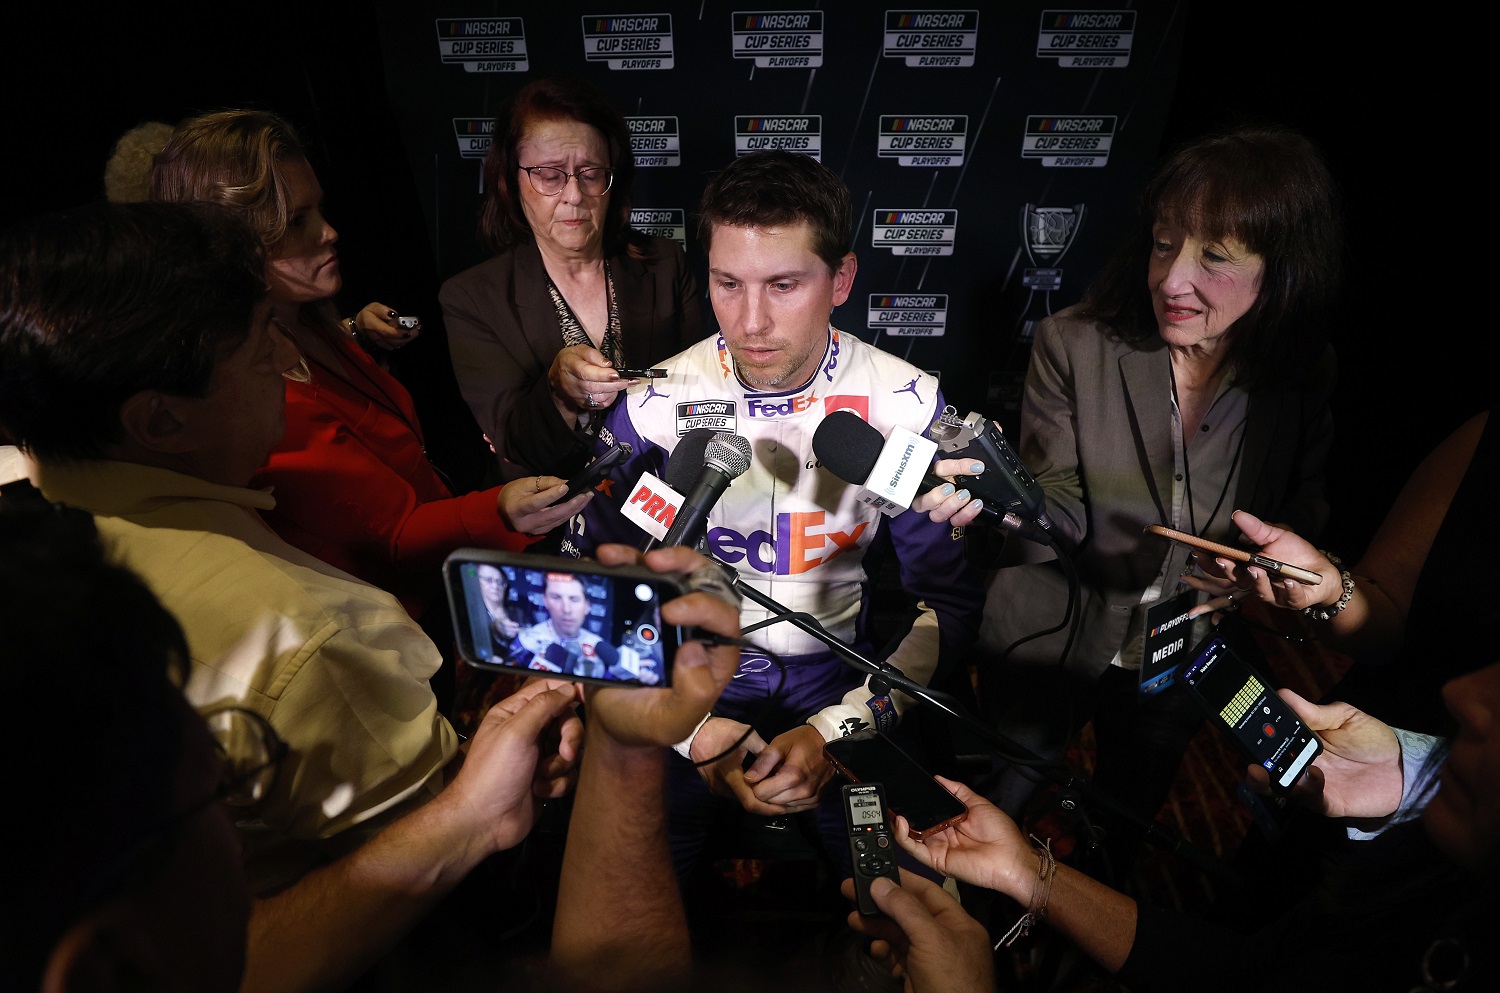 NASCAR driver Denny Hamlin speaks during the NASCAR Cup Series Playoff Media Day at Charlotte Convention Center on Sept. 1, 2022, in Charlotte, North Carolina. | Jared C. Tilton/Getty Images